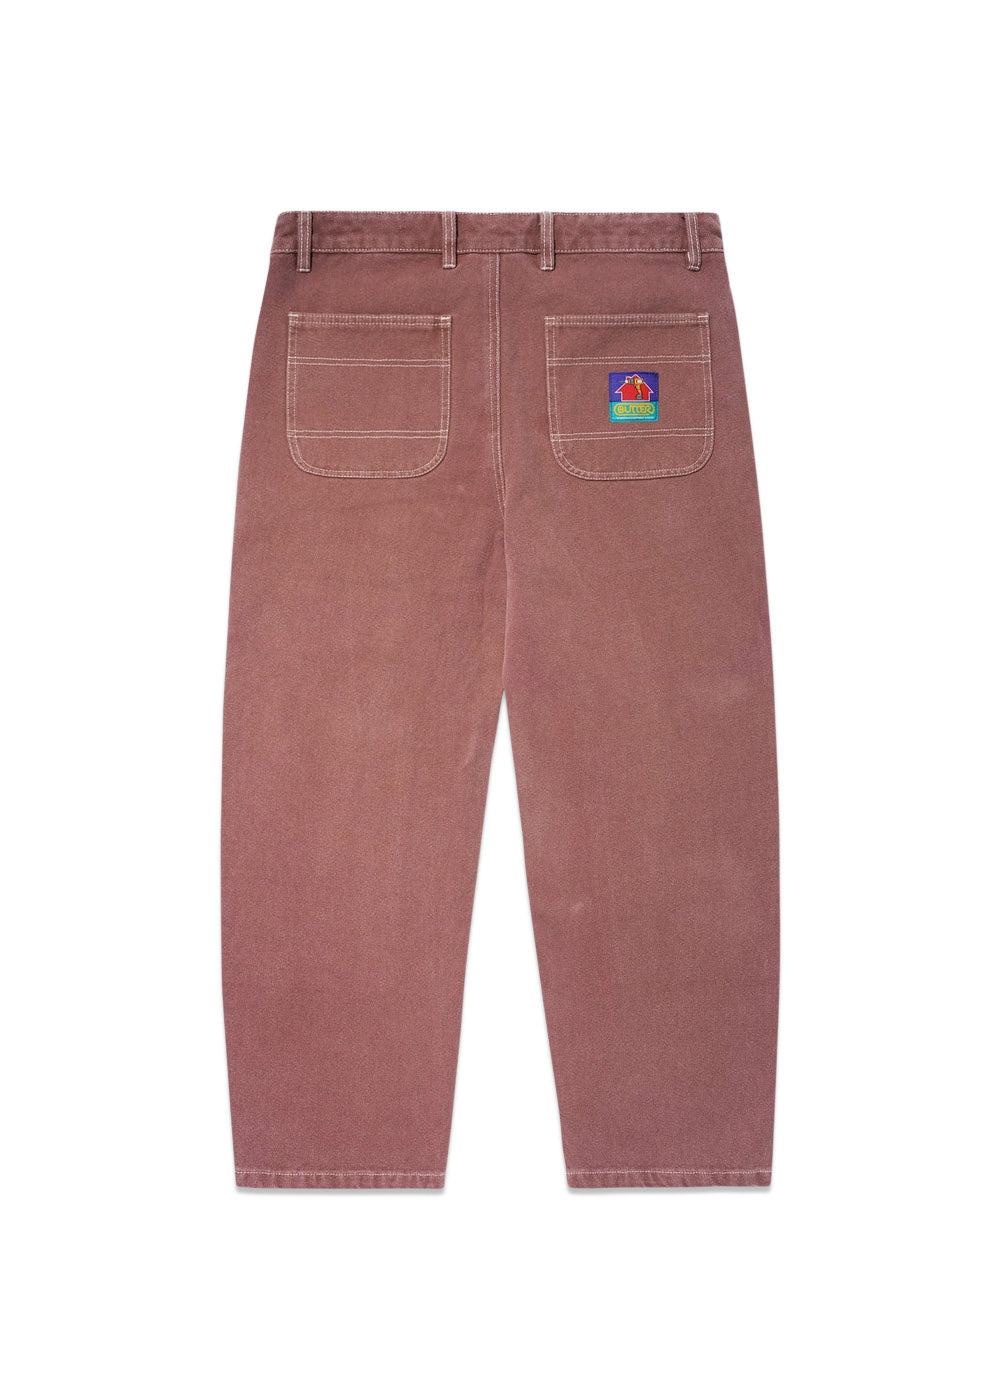 Washed Canvas Double Knee Pants - Brick